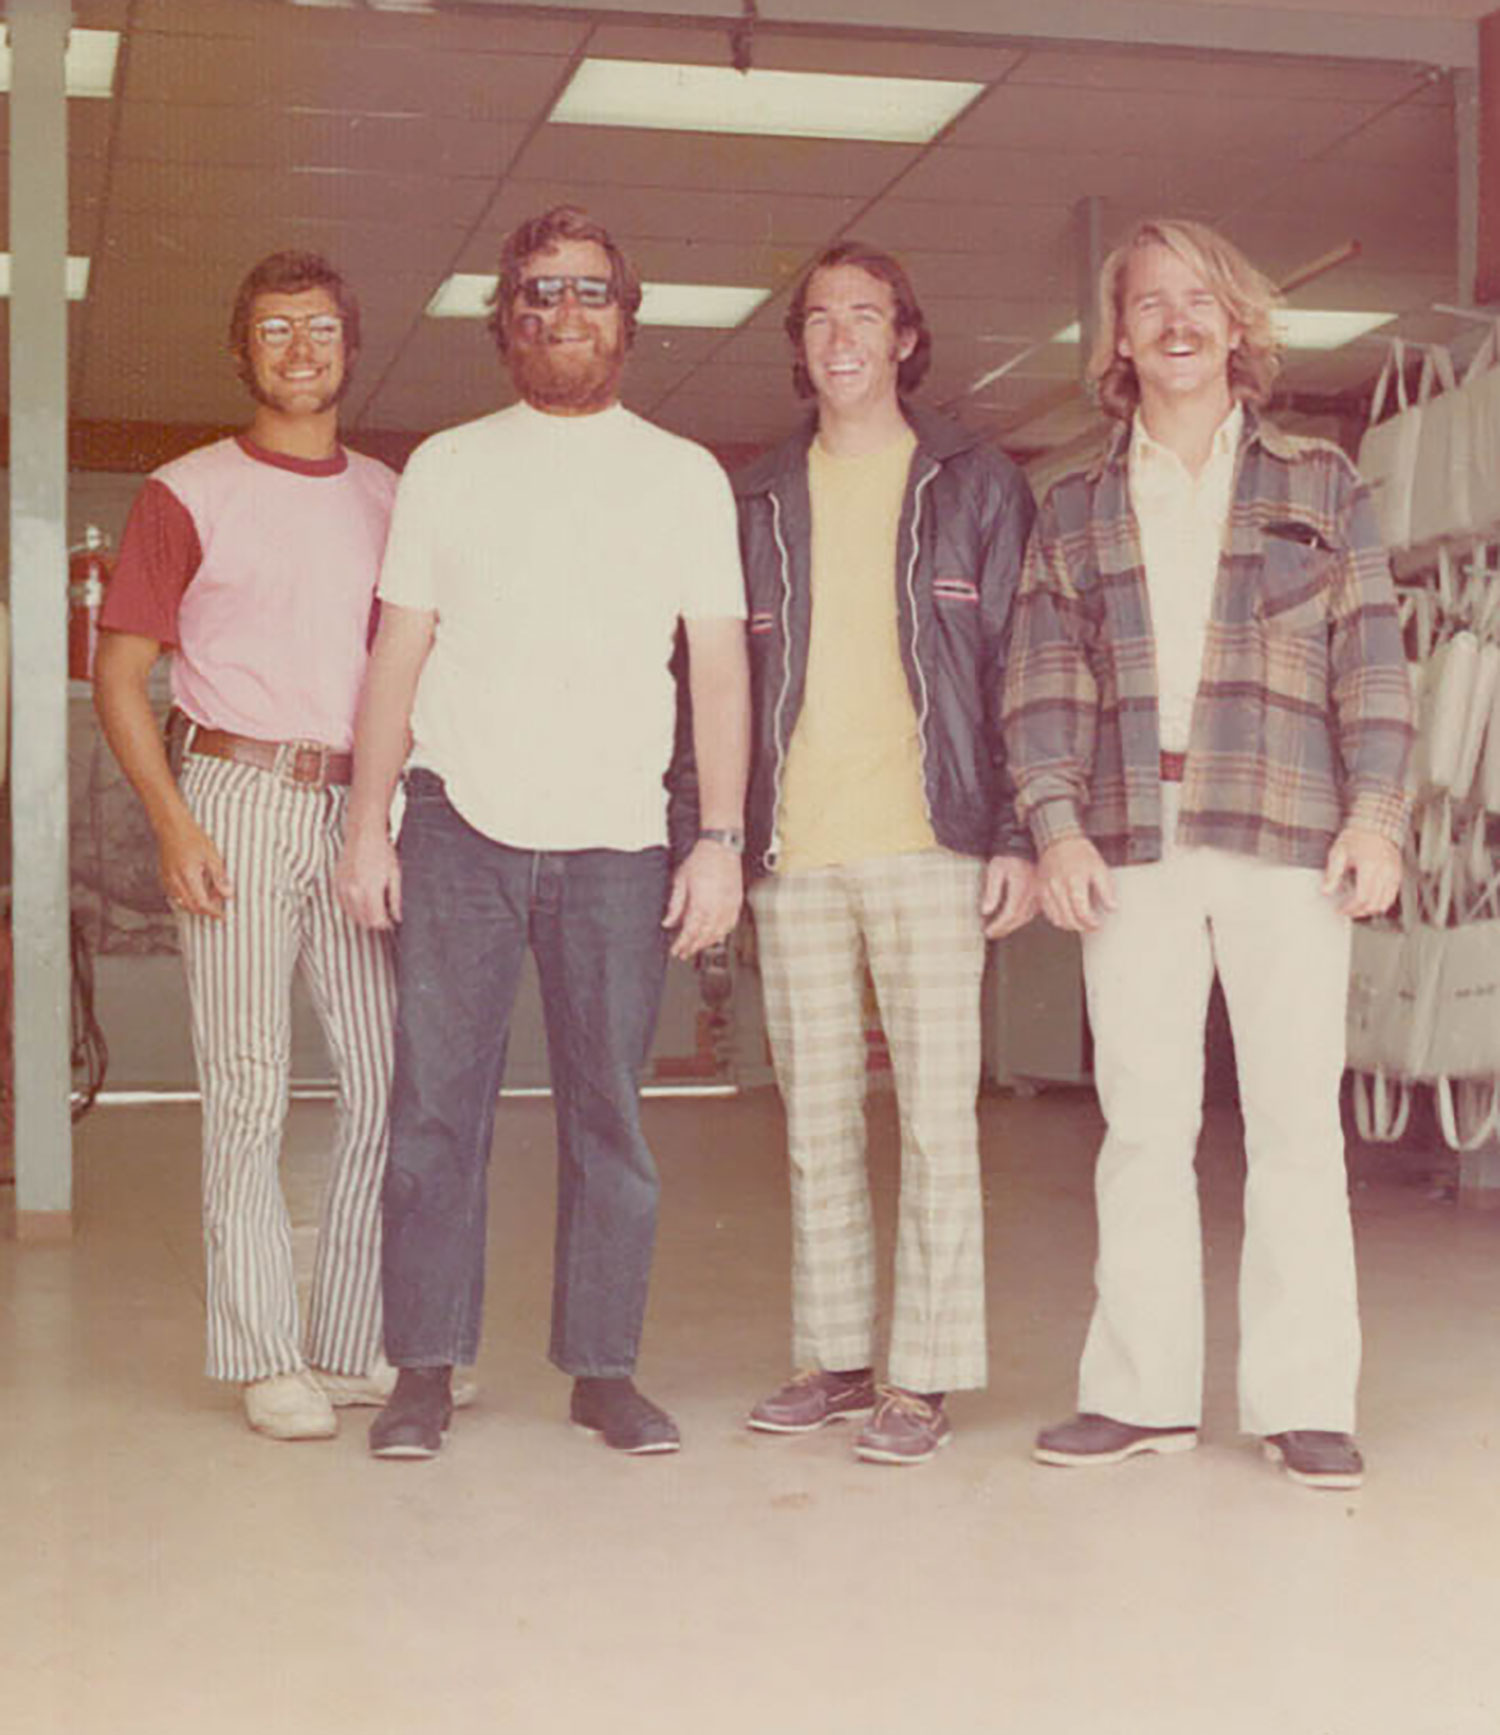 Group of people at the MBAC: From left to right: Bruce Keller, Jim Gri?2024-04-24